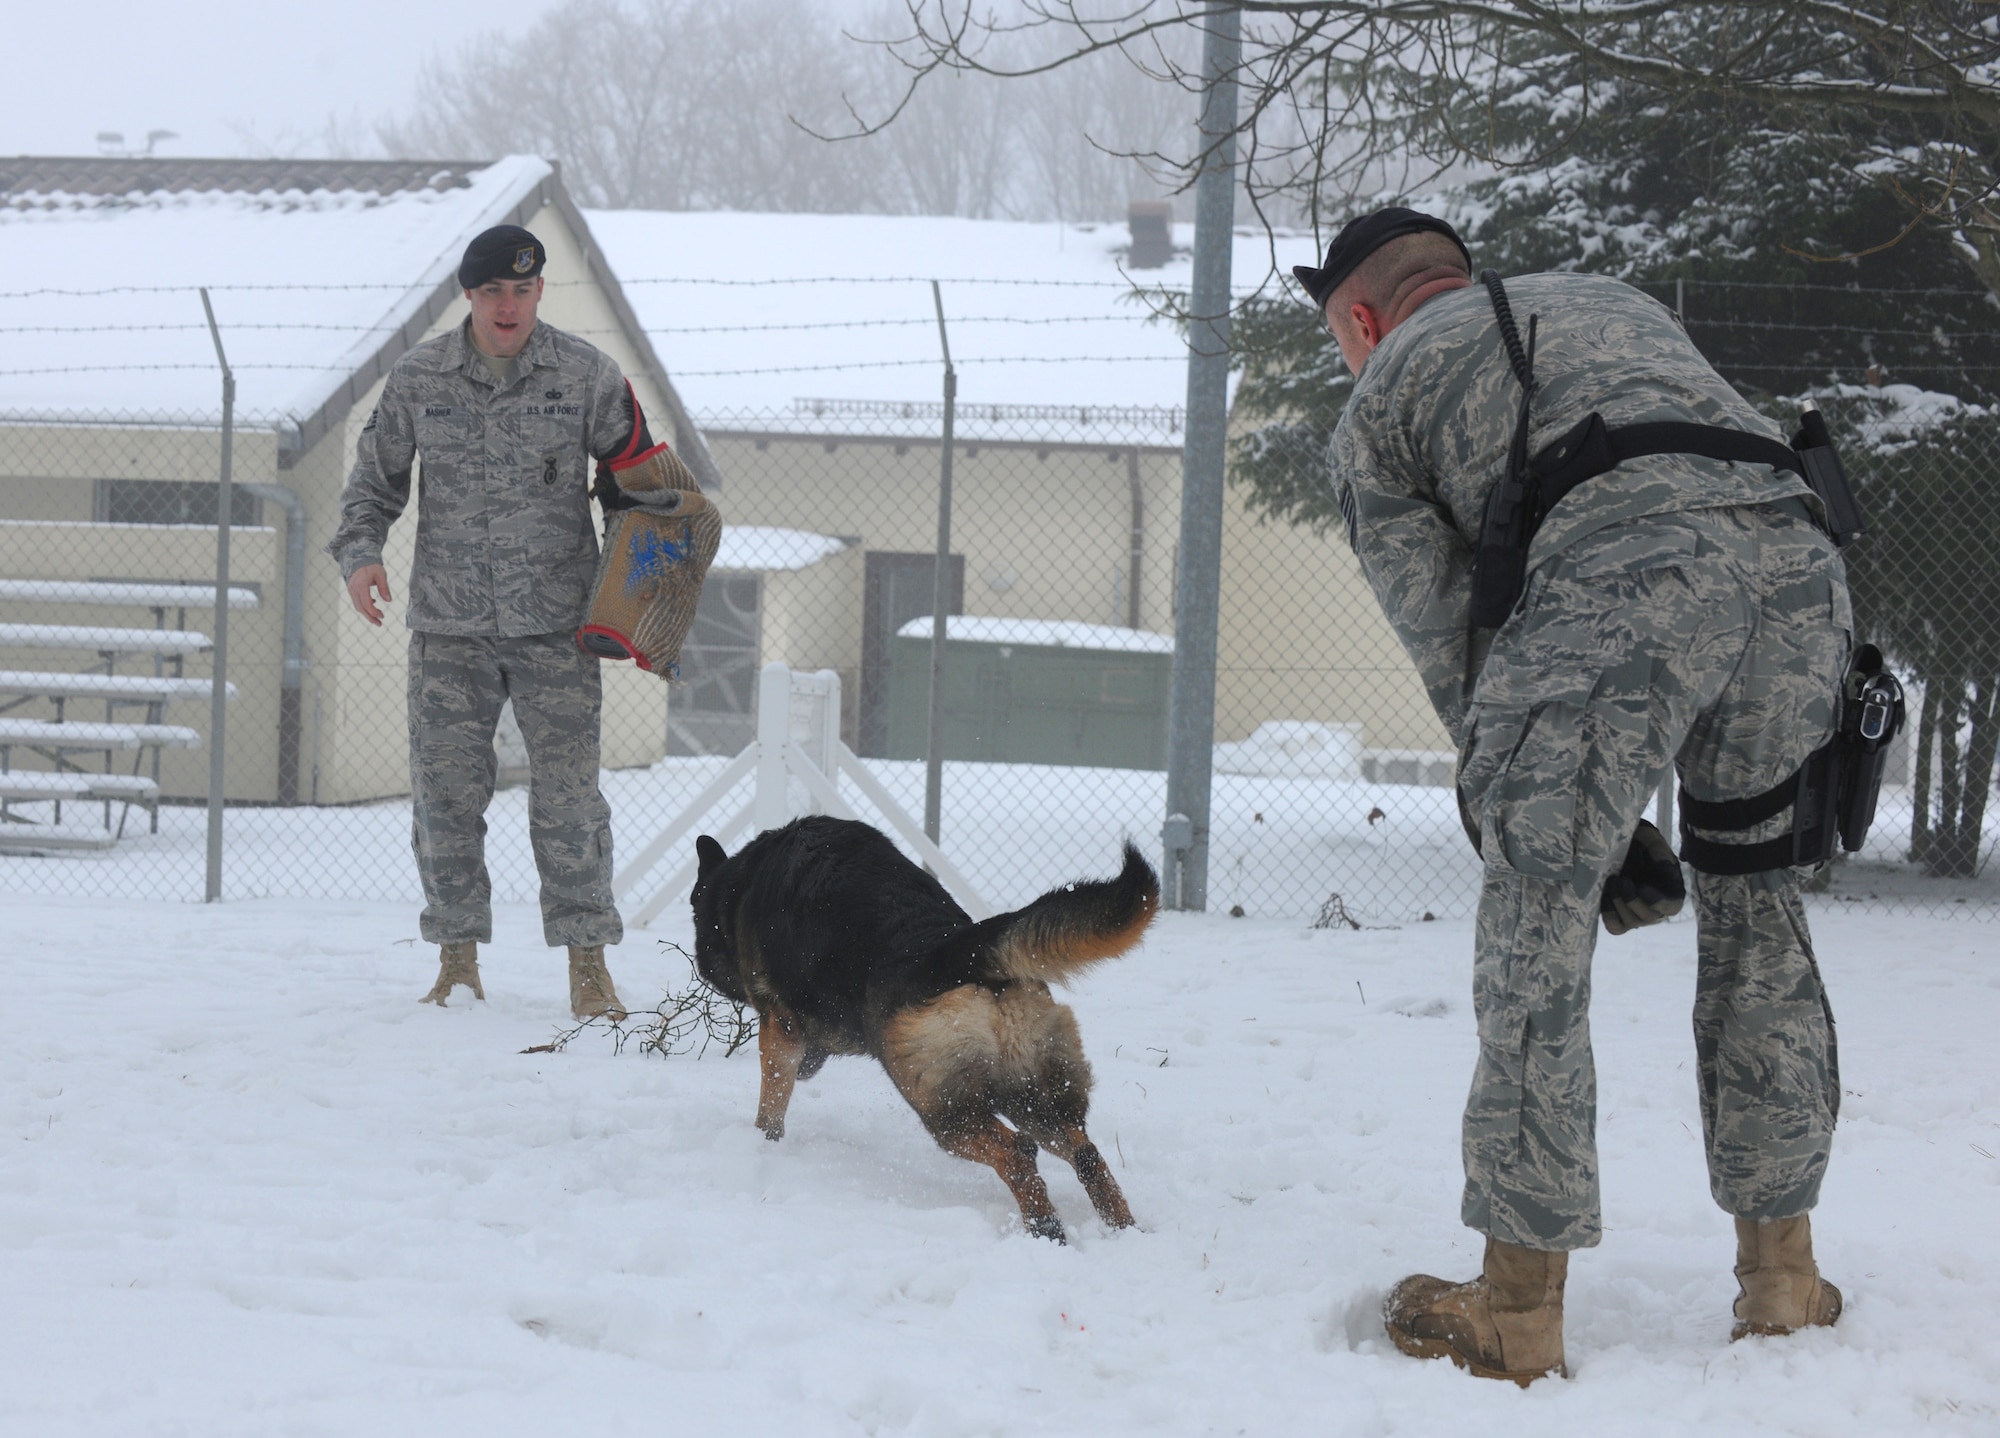 SPANGDAHLEM AIR BASE, Germany – Staff Sgt. David Simpson, 52nd Security Forces Squadron military working dog handler, gives Robson, a 5-year-old German Shepherd, the command to attack Staff Sgt. William Washer, 52nd SFS military working dog handler, during a training exercise at the 52nd SFS military working dog facility Dec. 29. Handlers play and train with their dogs in the snow to acclimate them to cold German winters and harsh conditions that they must work in. (U.S. Air Force photo/Senior Airman Nathanael Callon)